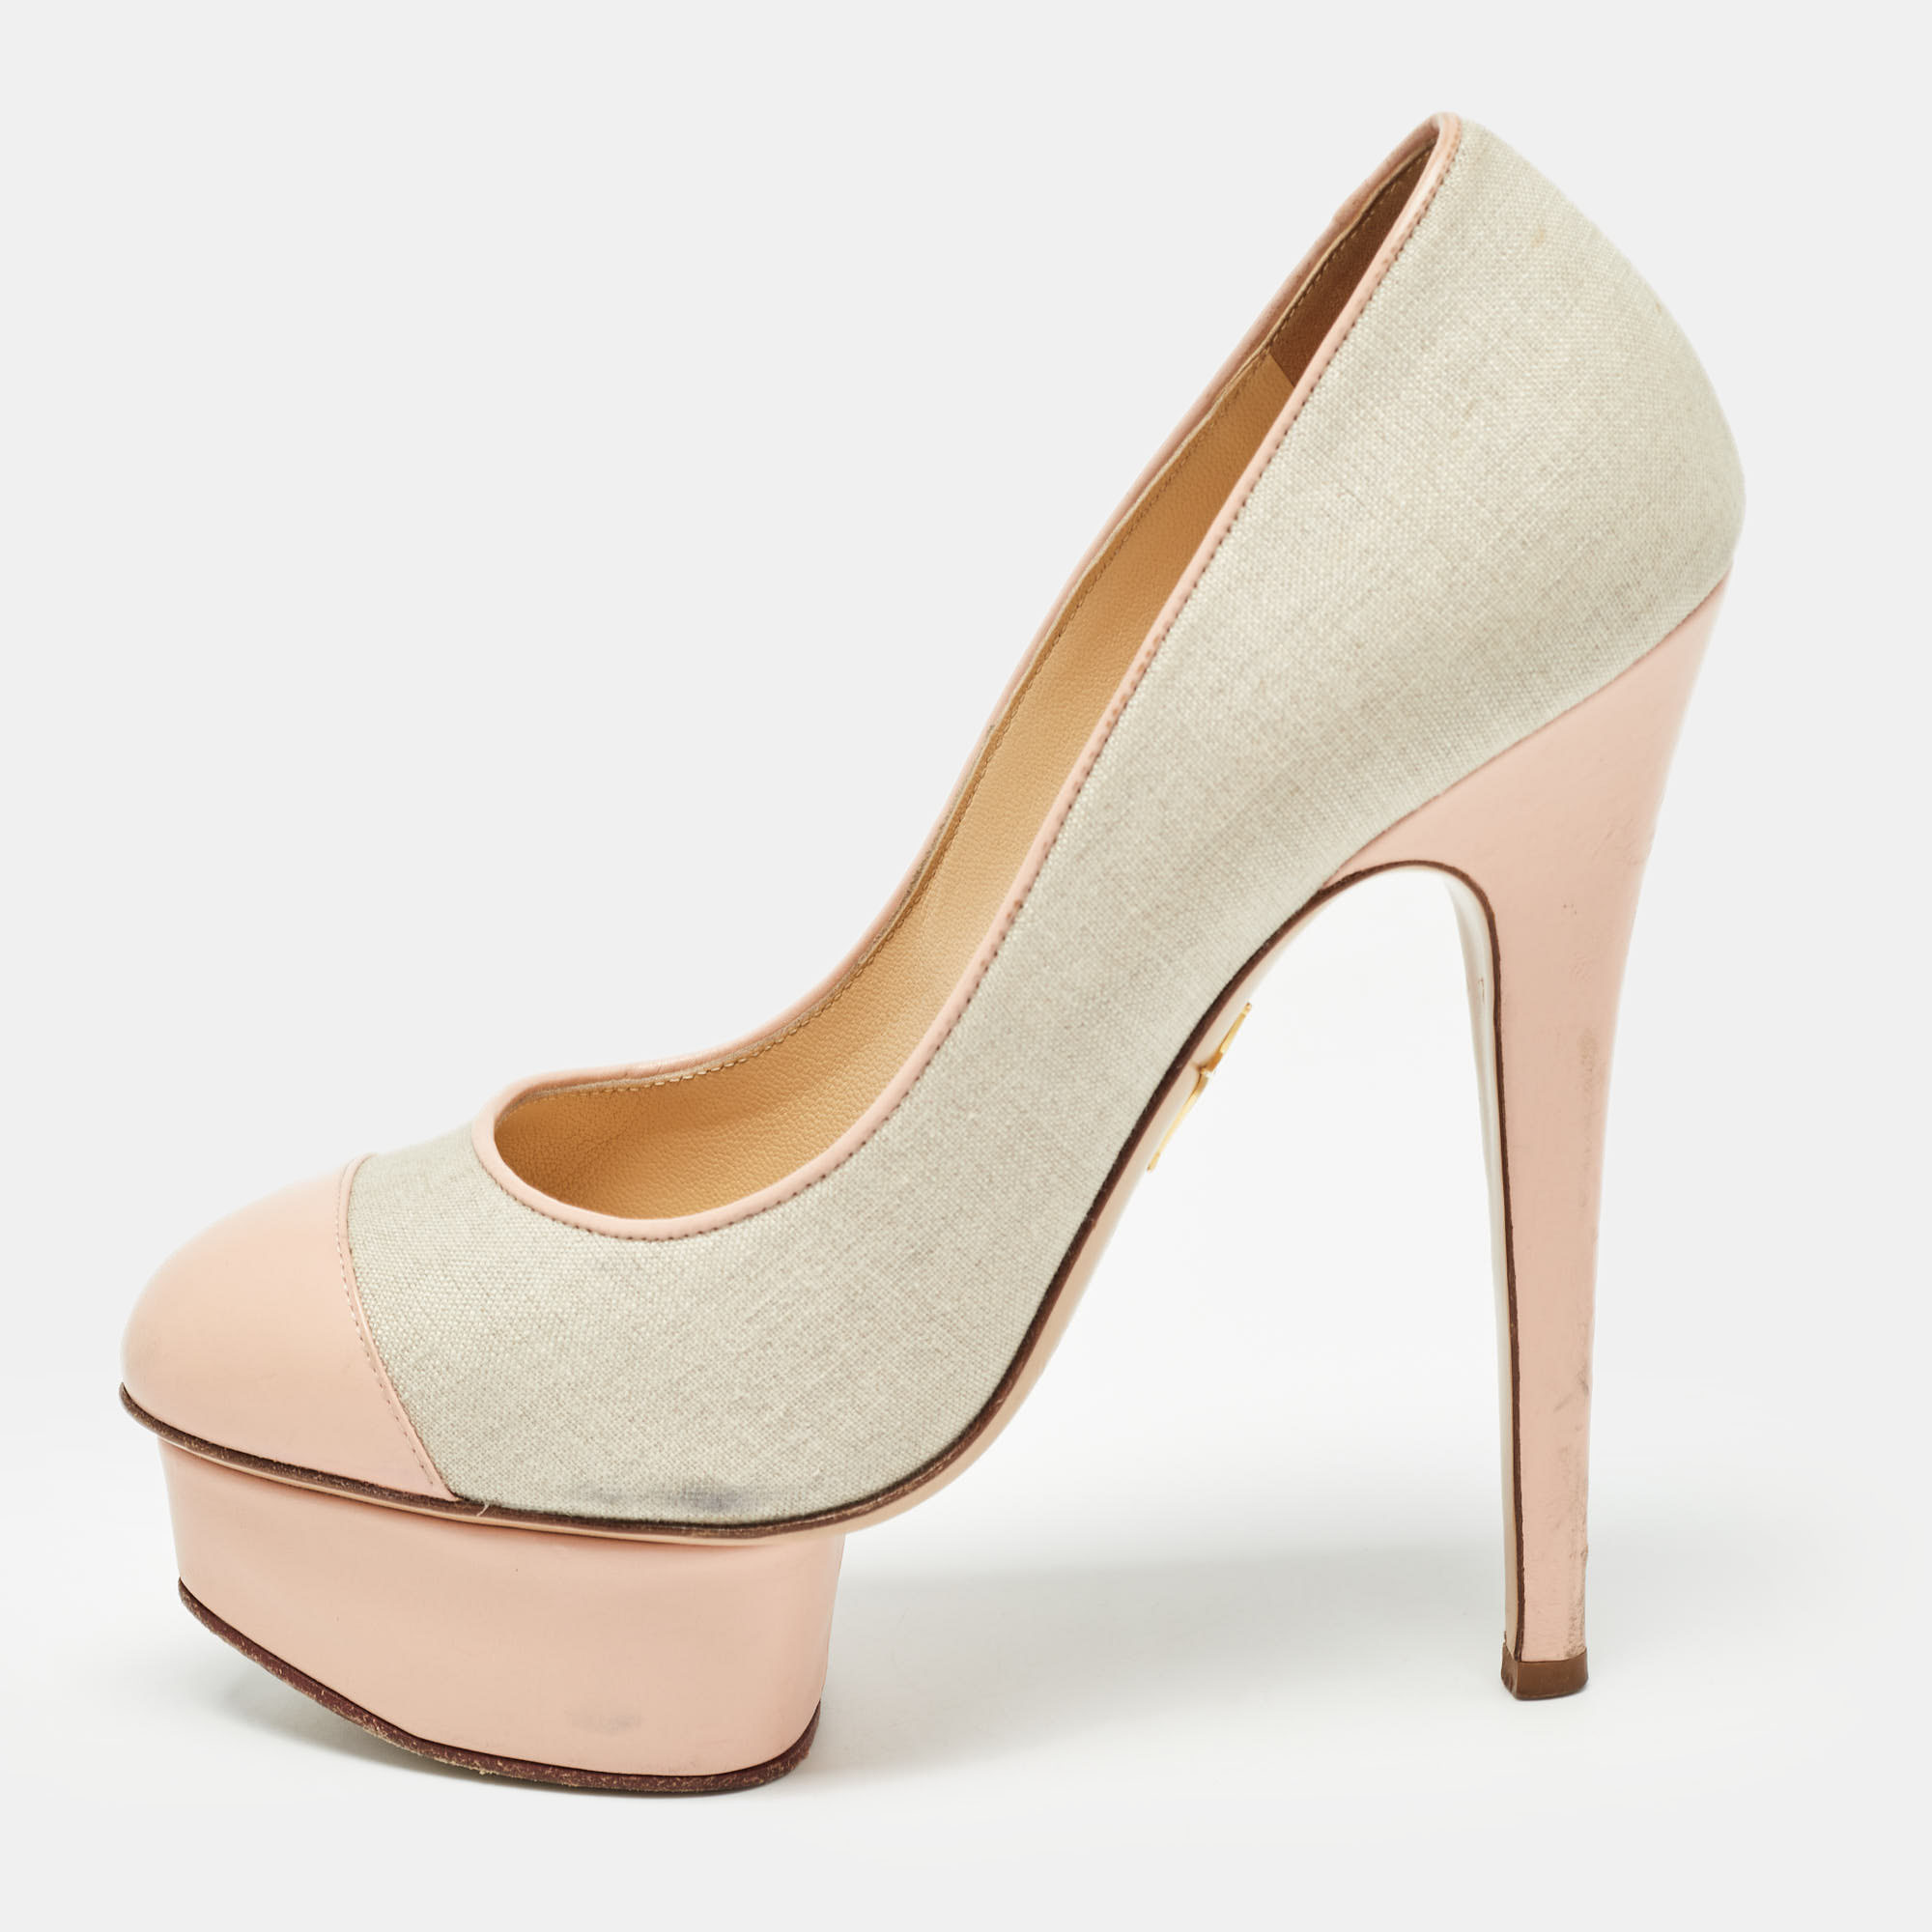 Charlotte olympia pink/grey canvas and leather dolly pumps size 36